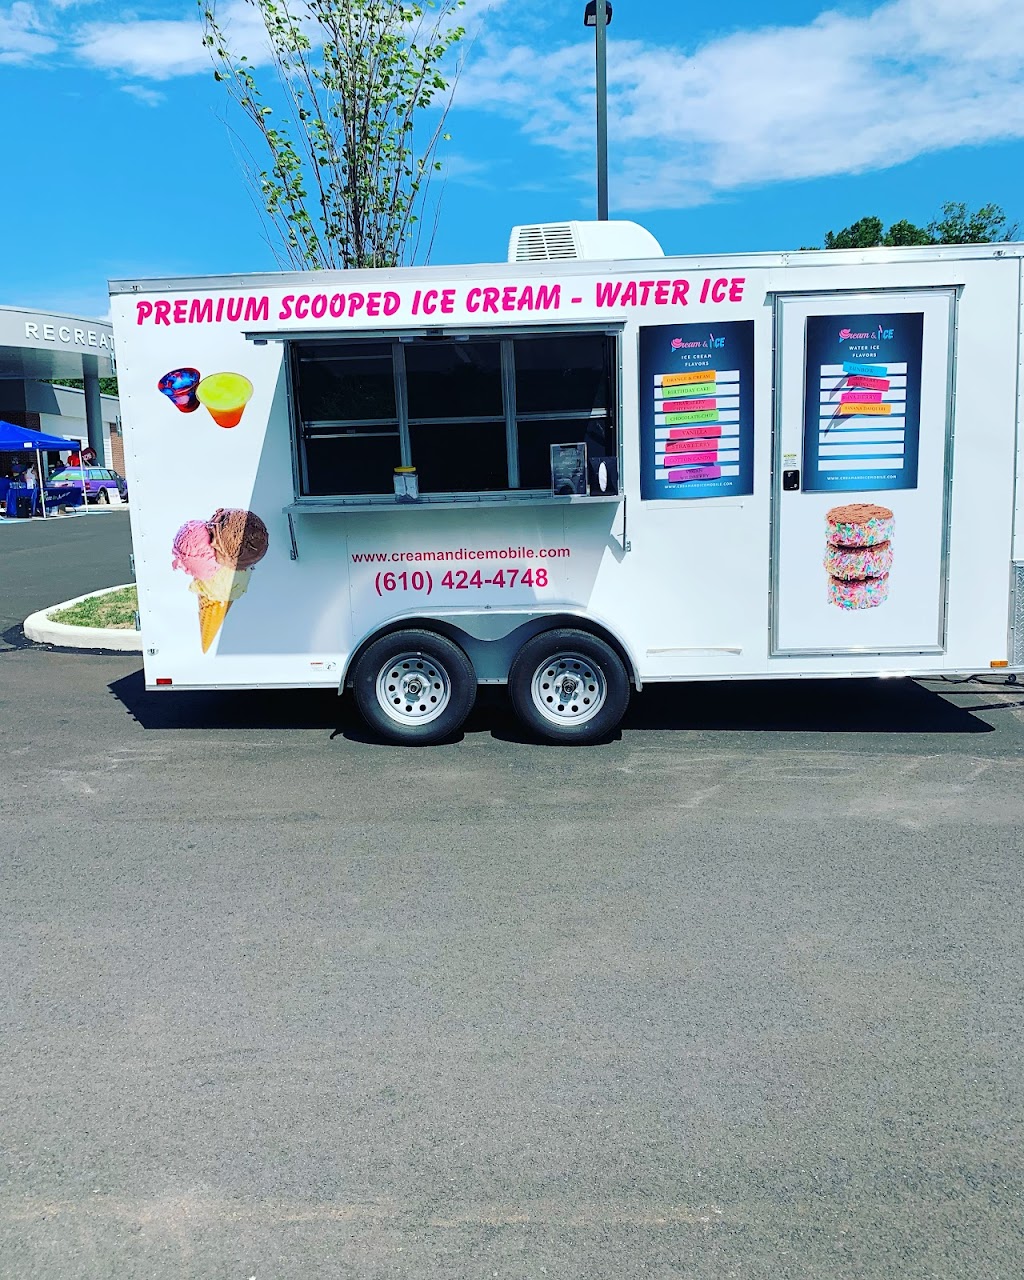 Cream and Ice | 2014 W Main St, West Norriton, PA 19403 | Phone: (610) 630-1730